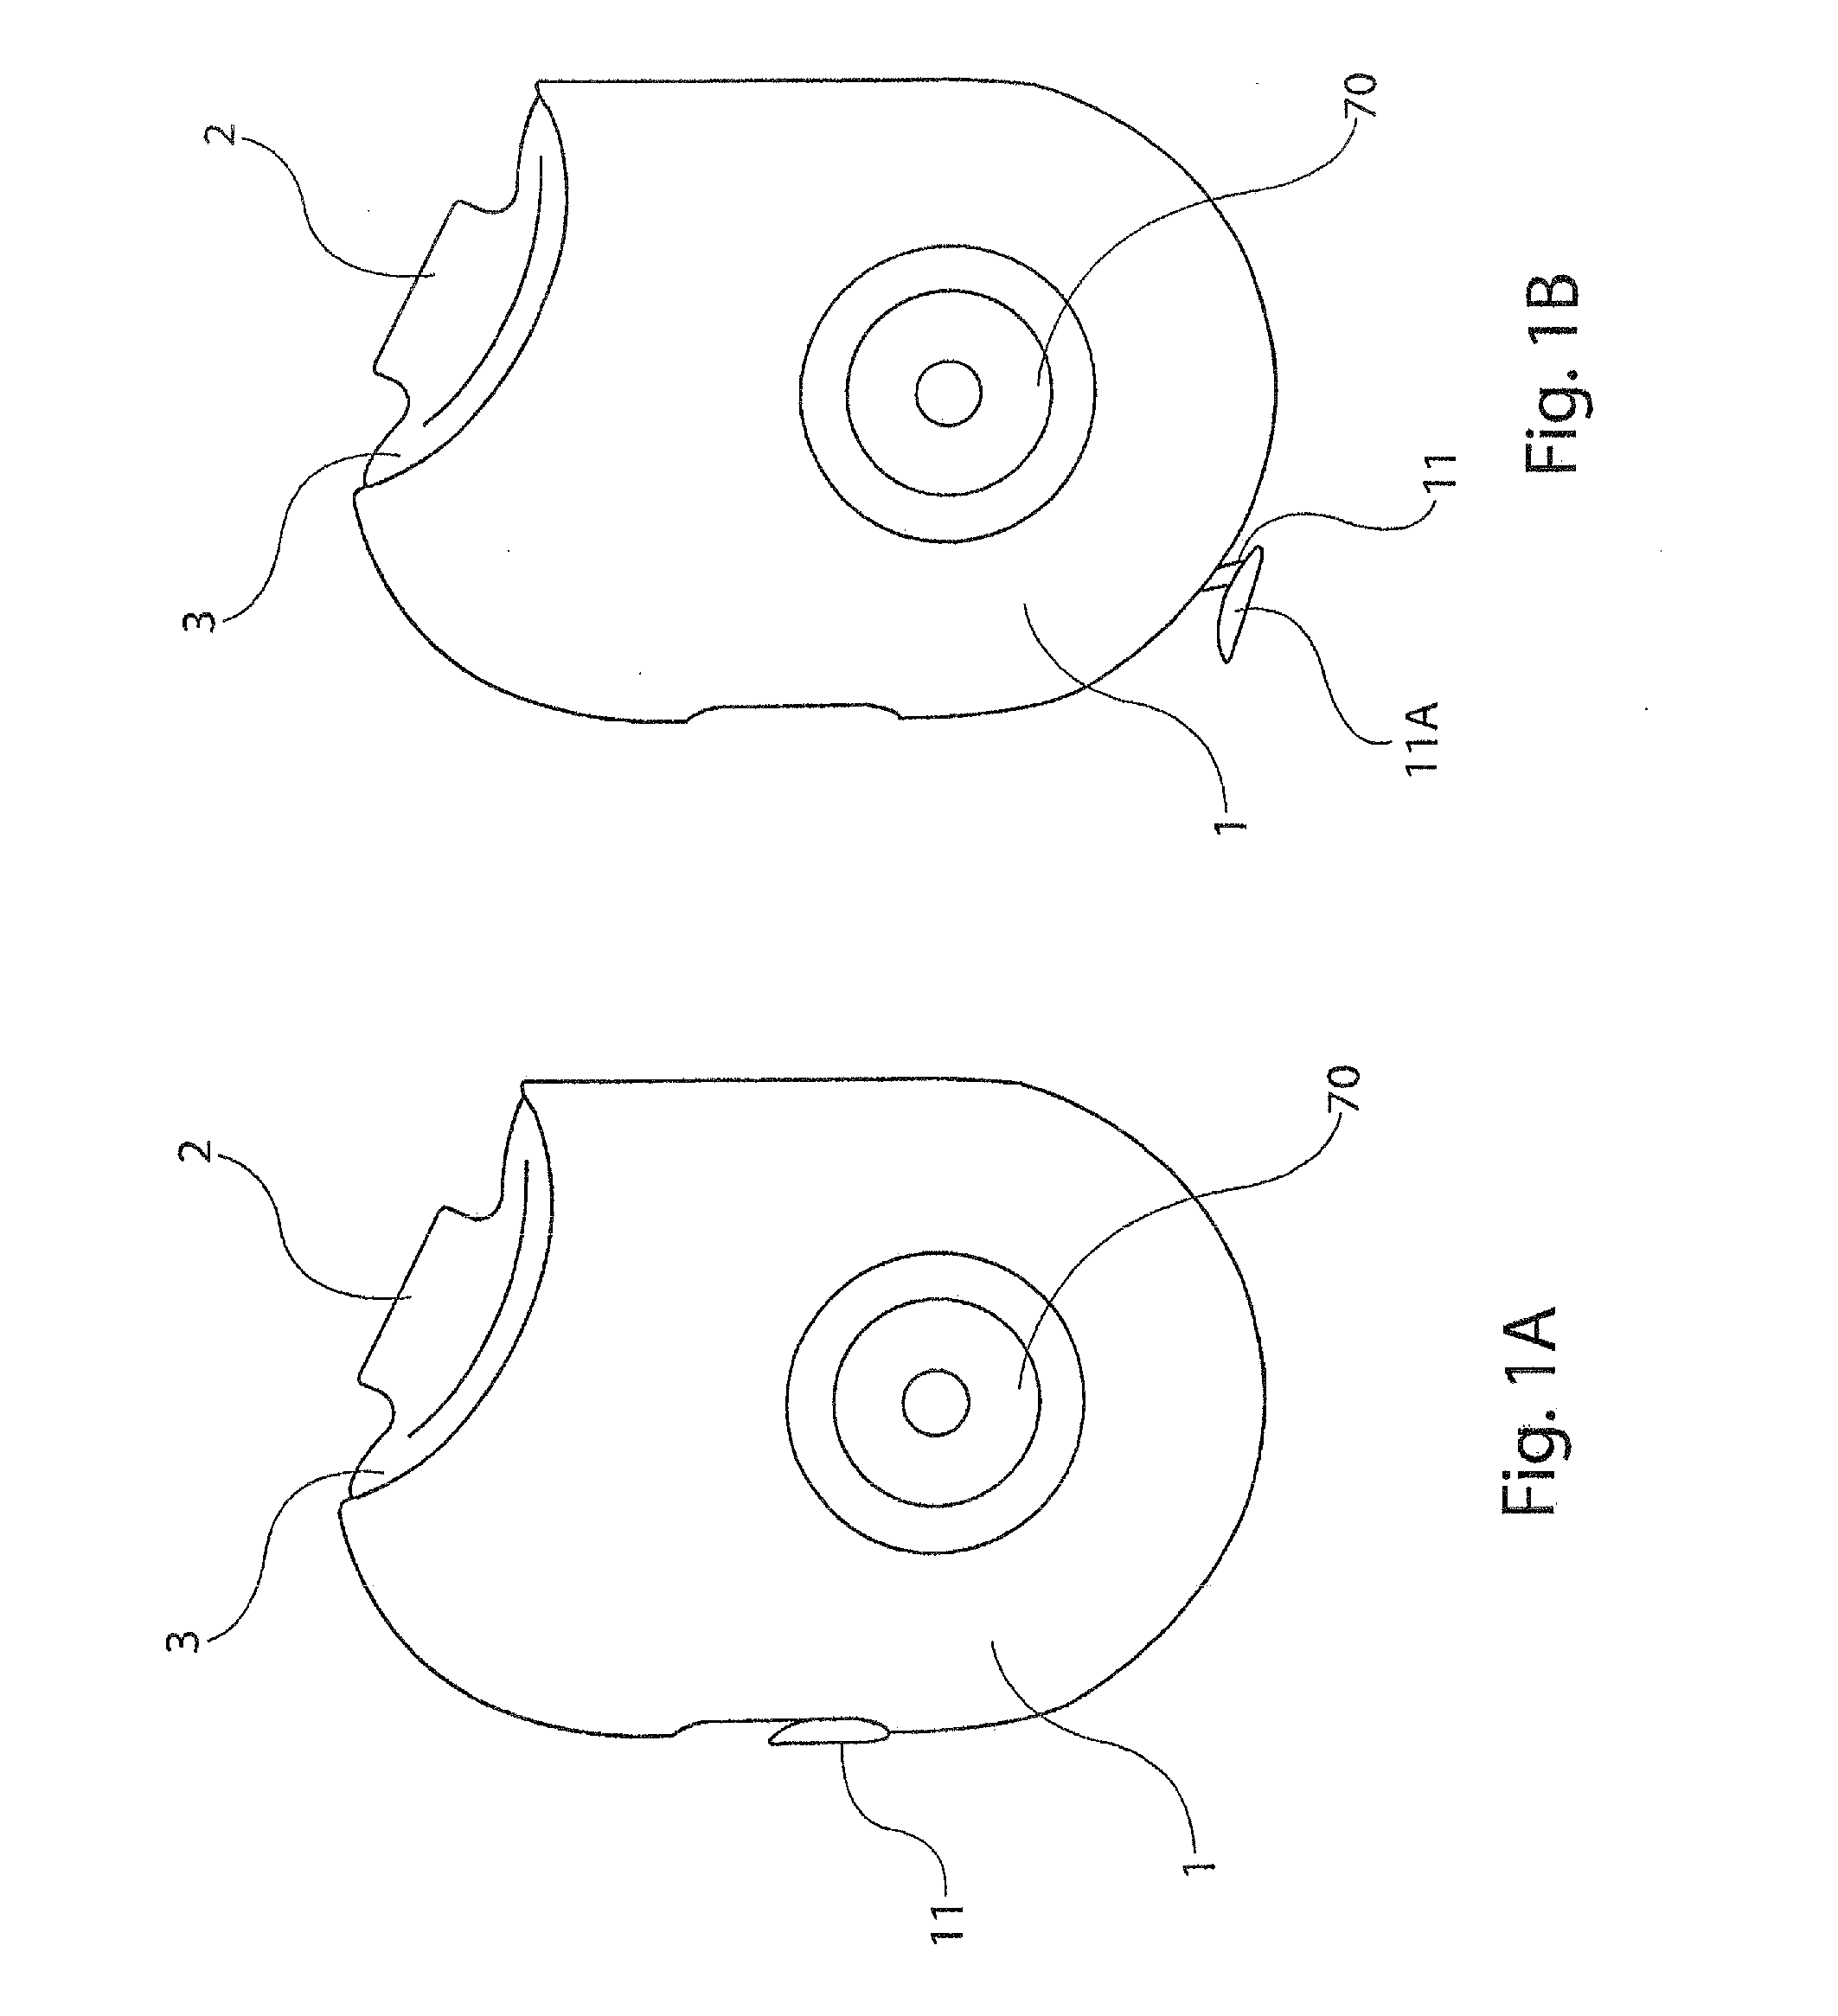 Method and device for clamping a blister within a dry powder inhaler